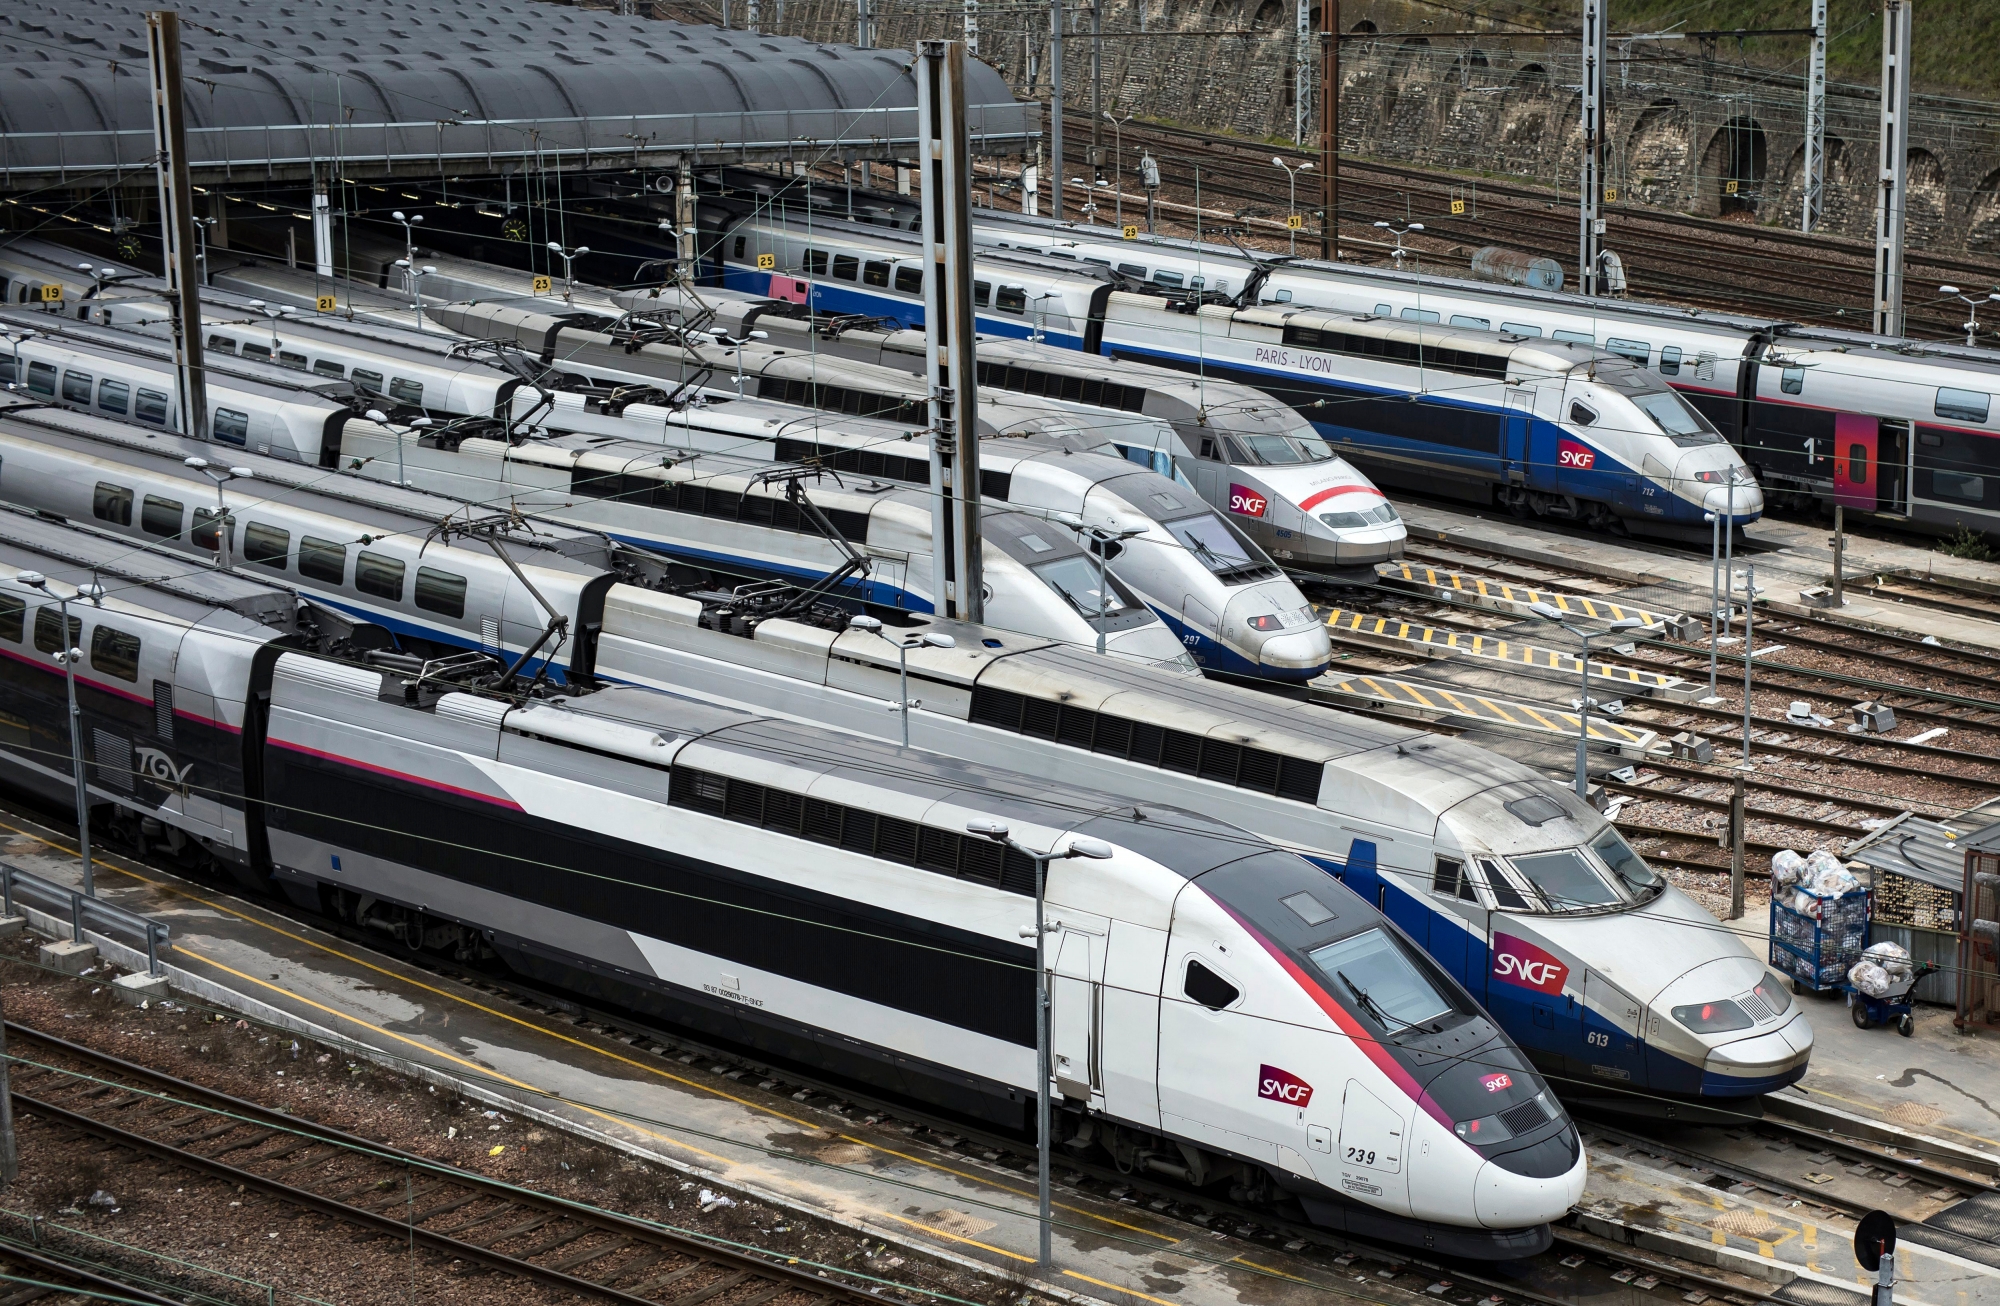 epa06619826 French TGV trains sit in the train depot of France's national rail network SNCF in Charenton-le-pont, during a nation-wide strike day affecting public transport, namely SNCF train travel, outside Paris, France, 22 March 2018. A national strike day was called by public sector workers and labor unions to defend labor rights and pensions.  EPA/IAN LANGSDON FRANCE TRANSPORT STRIKE